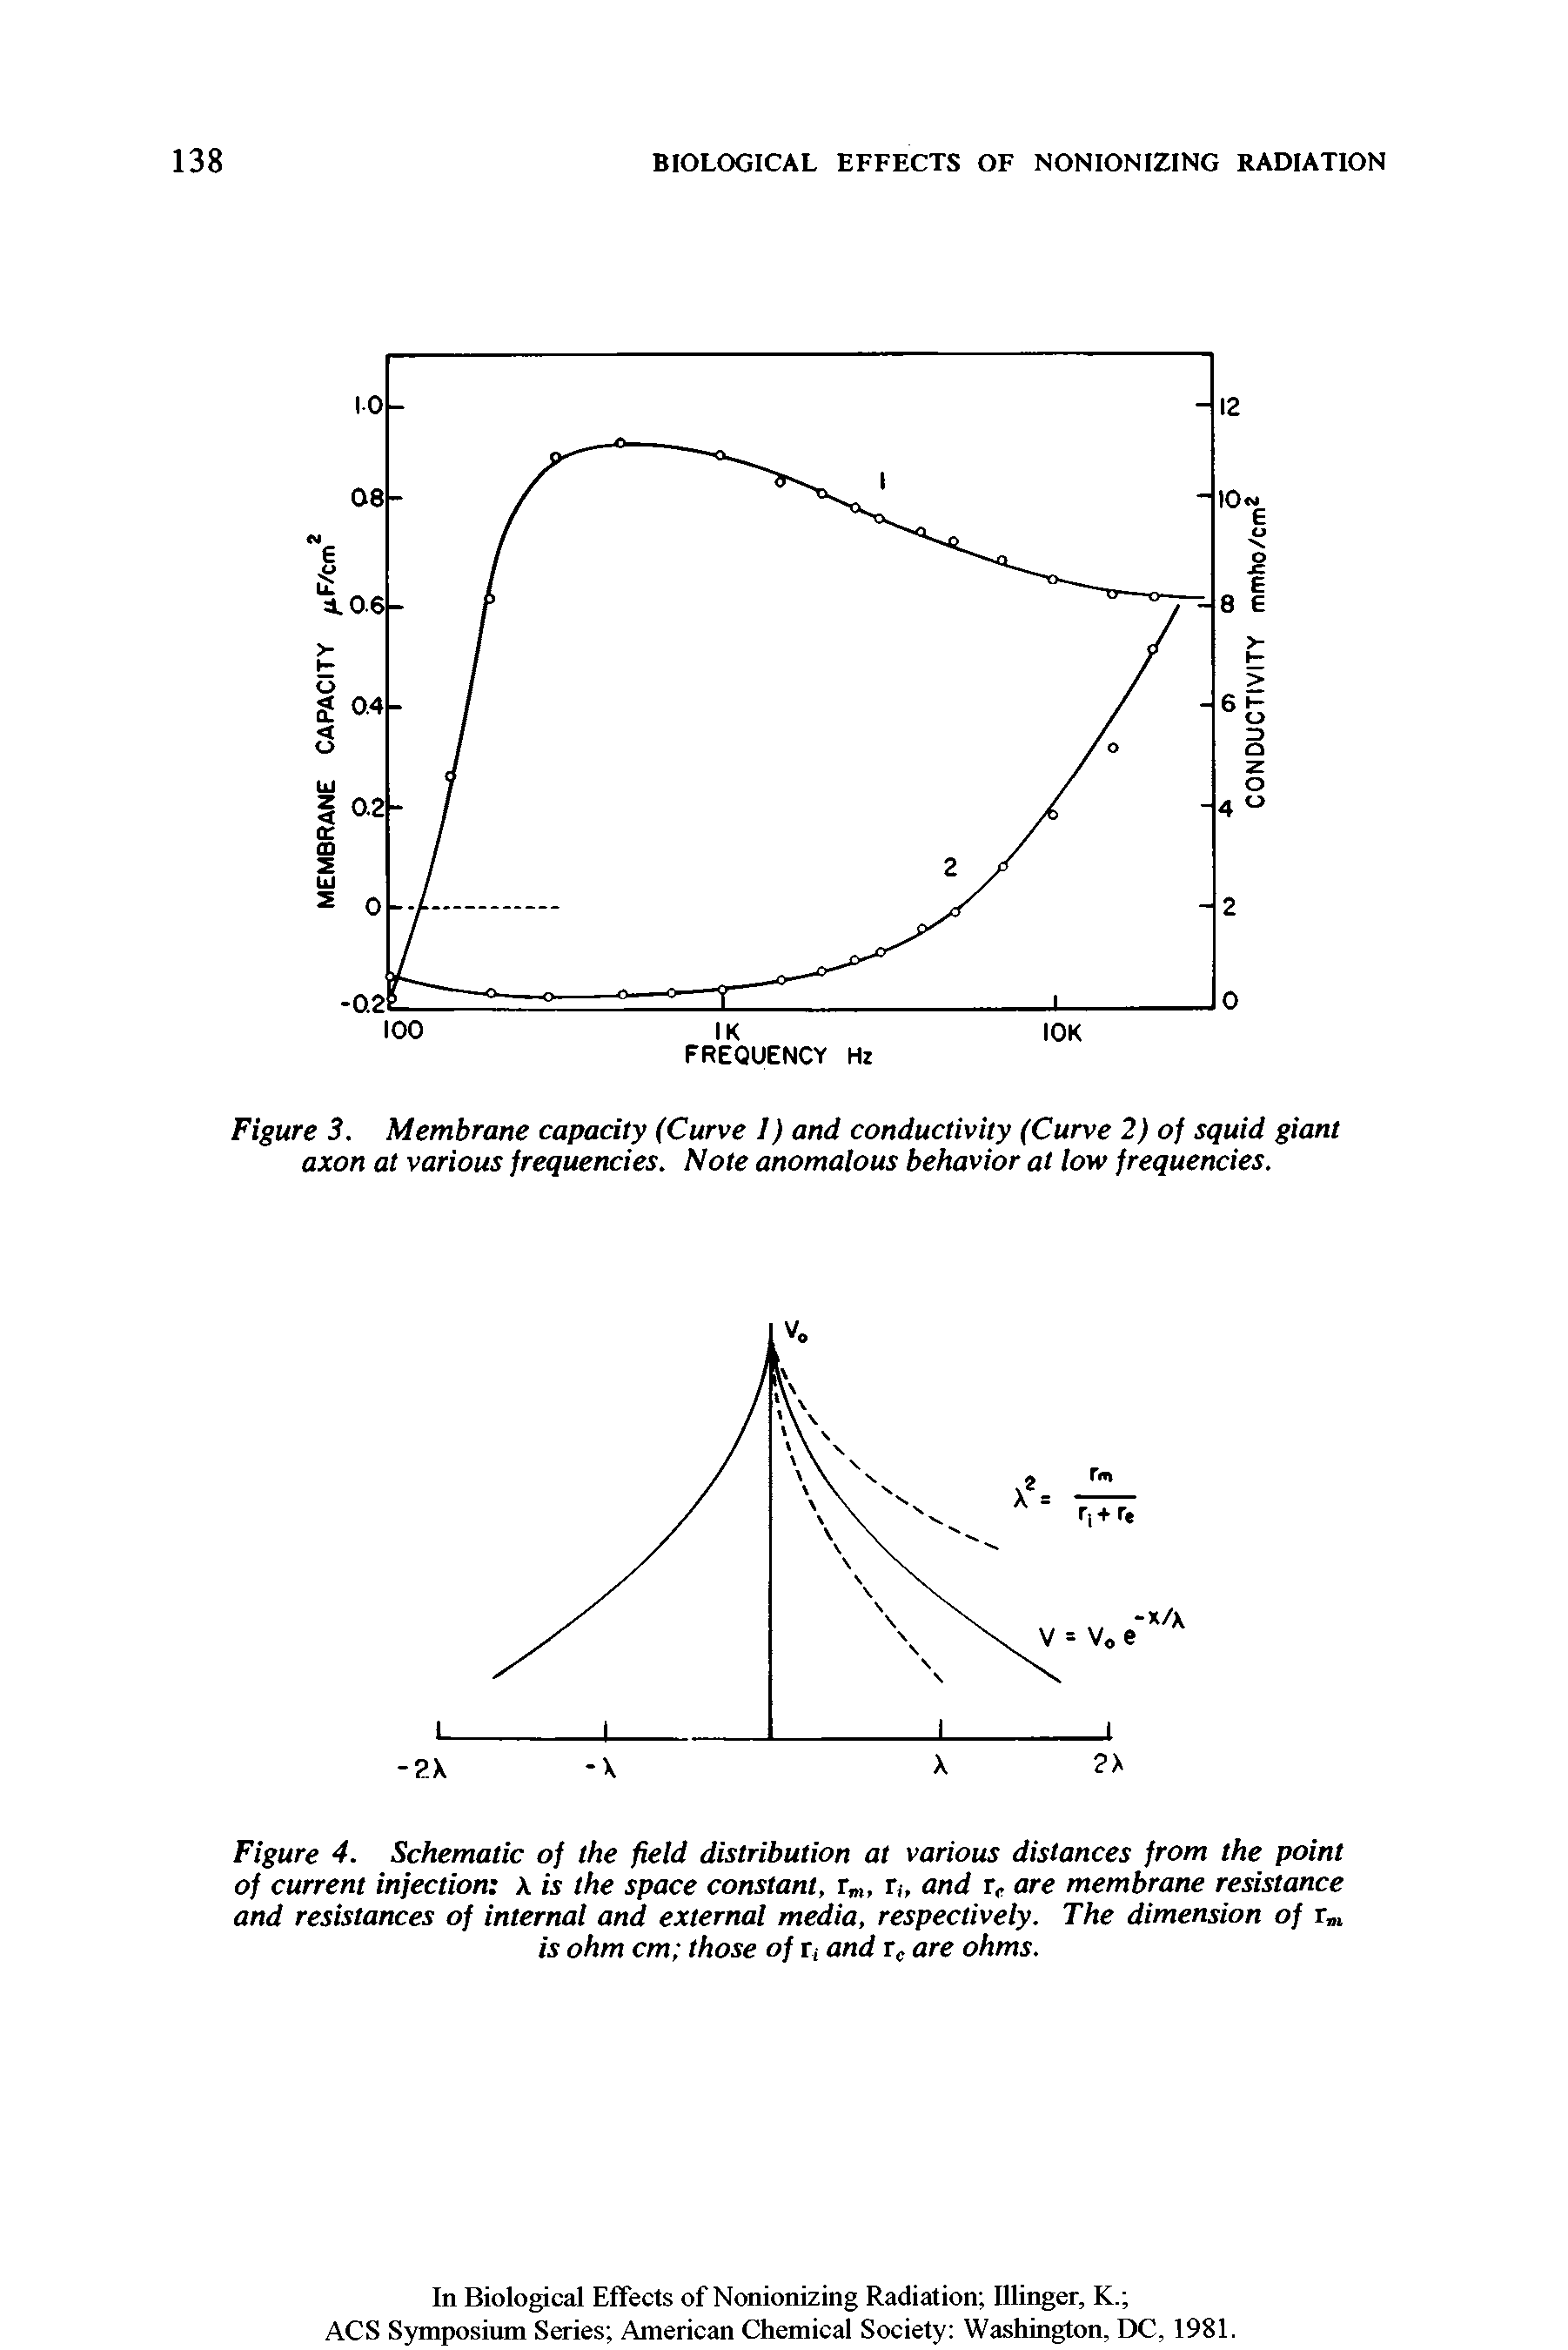 Figure 3. Membrane capacity (Curve I) and conductivity (Curve 2) of squid giant axon at various frequencies. Note anomalous behavior at low frequencies.